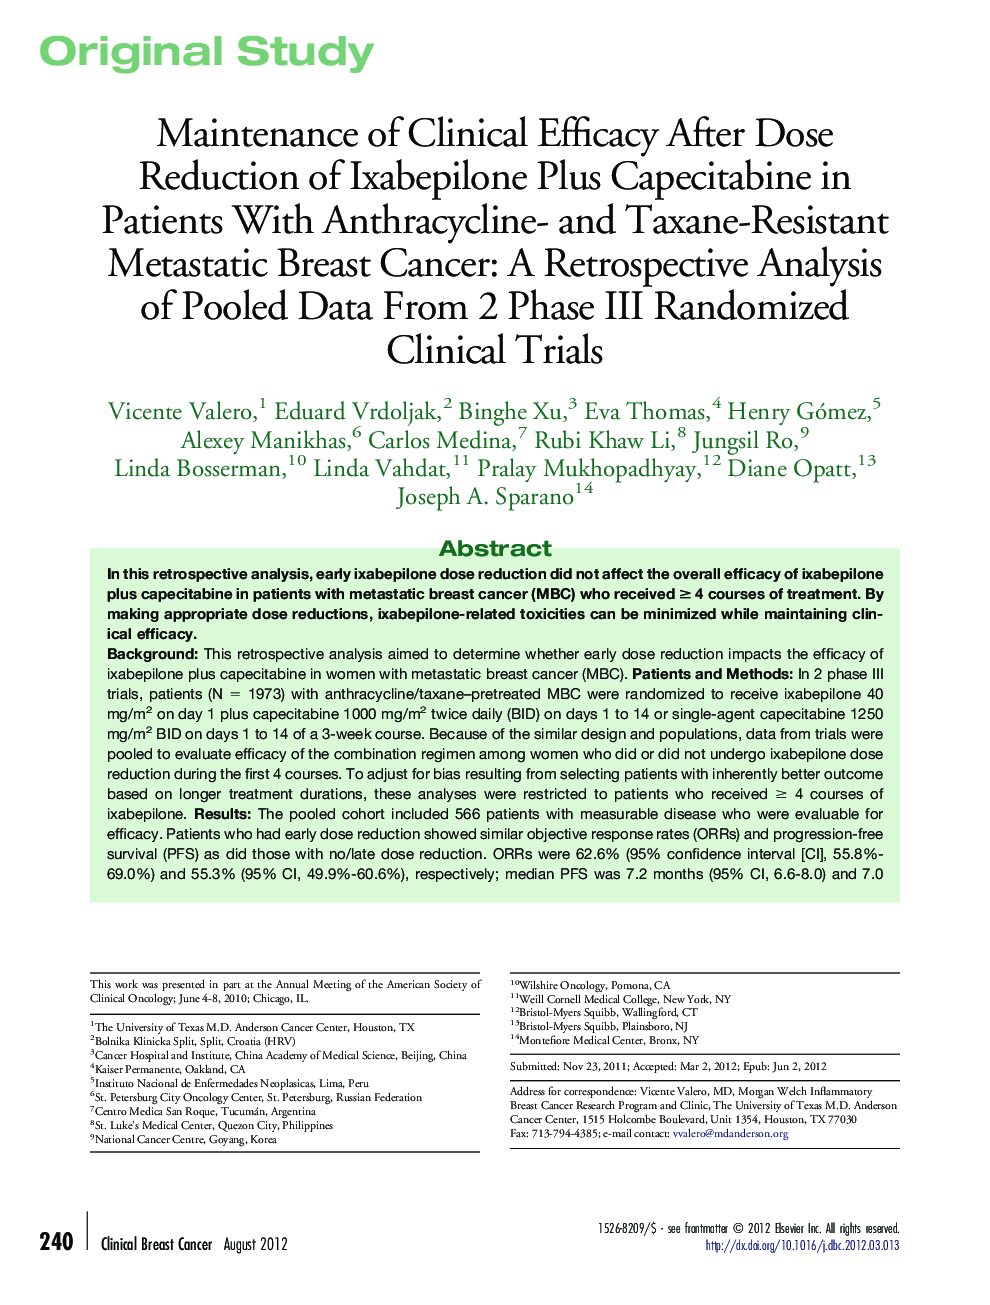 Maintenance of Clinical Efficacy After Dose Reduction of Ixabepilone Plus Capecitabine in Patients With Anthracycline- and Taxane-Resistant Metastatic Breast Cancer: A Retrospective Analysis of Pooled Data From 2 Phase III Randomized Clinical Trials